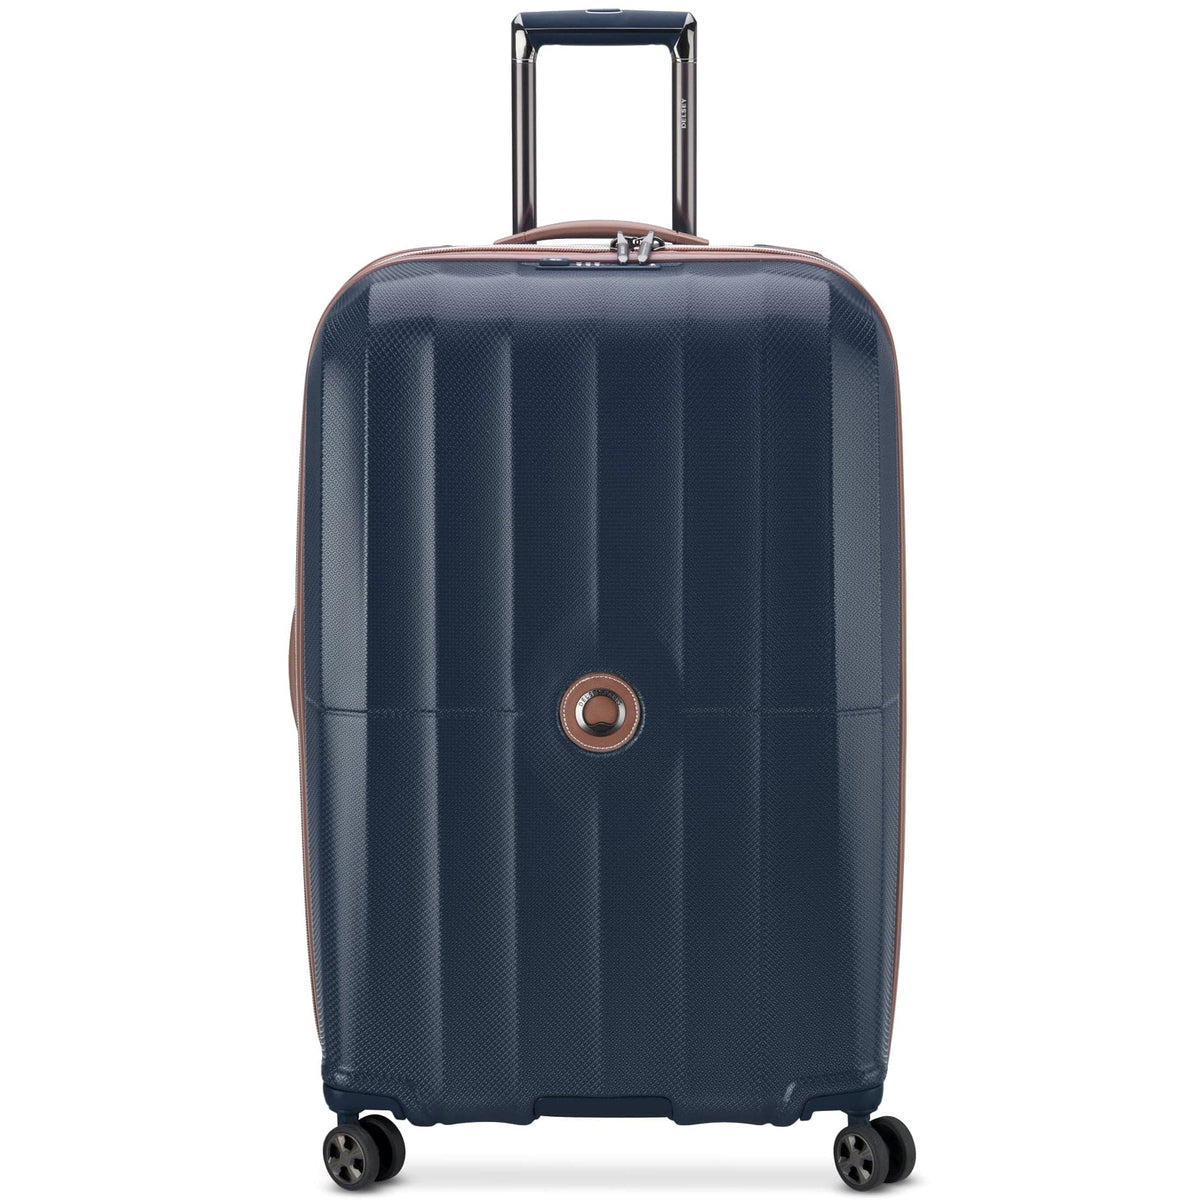 Delsey ST. Tropez Hardside Expandable Spinner Checked Luggage - 28" Large